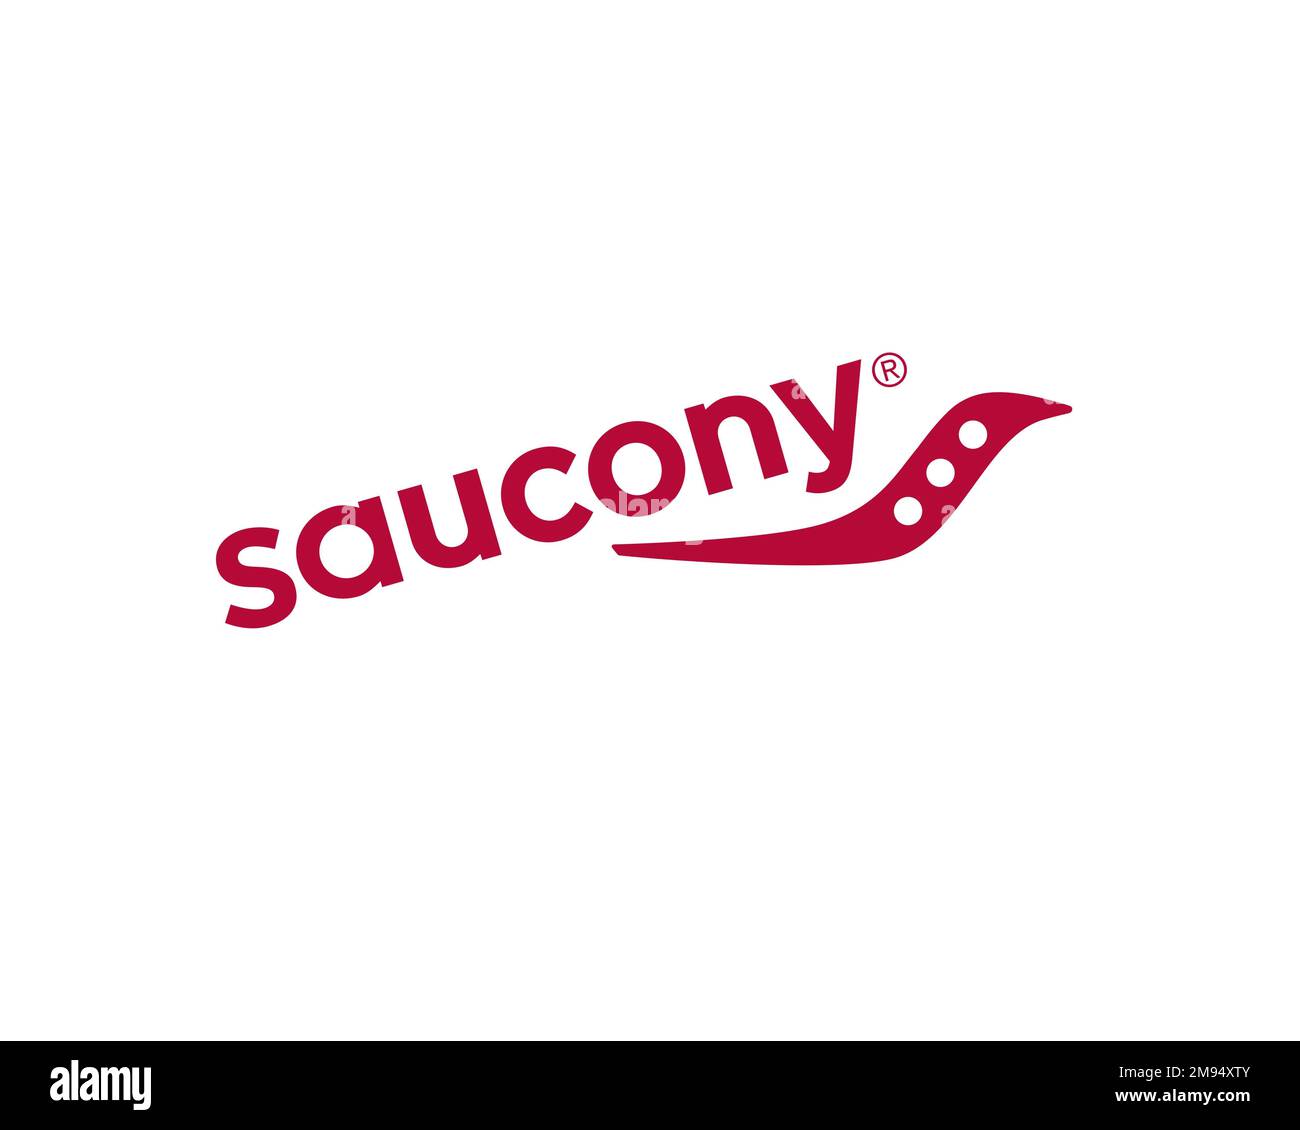 Saucony logo Cut Out Stock Images & Pictures - Alamy